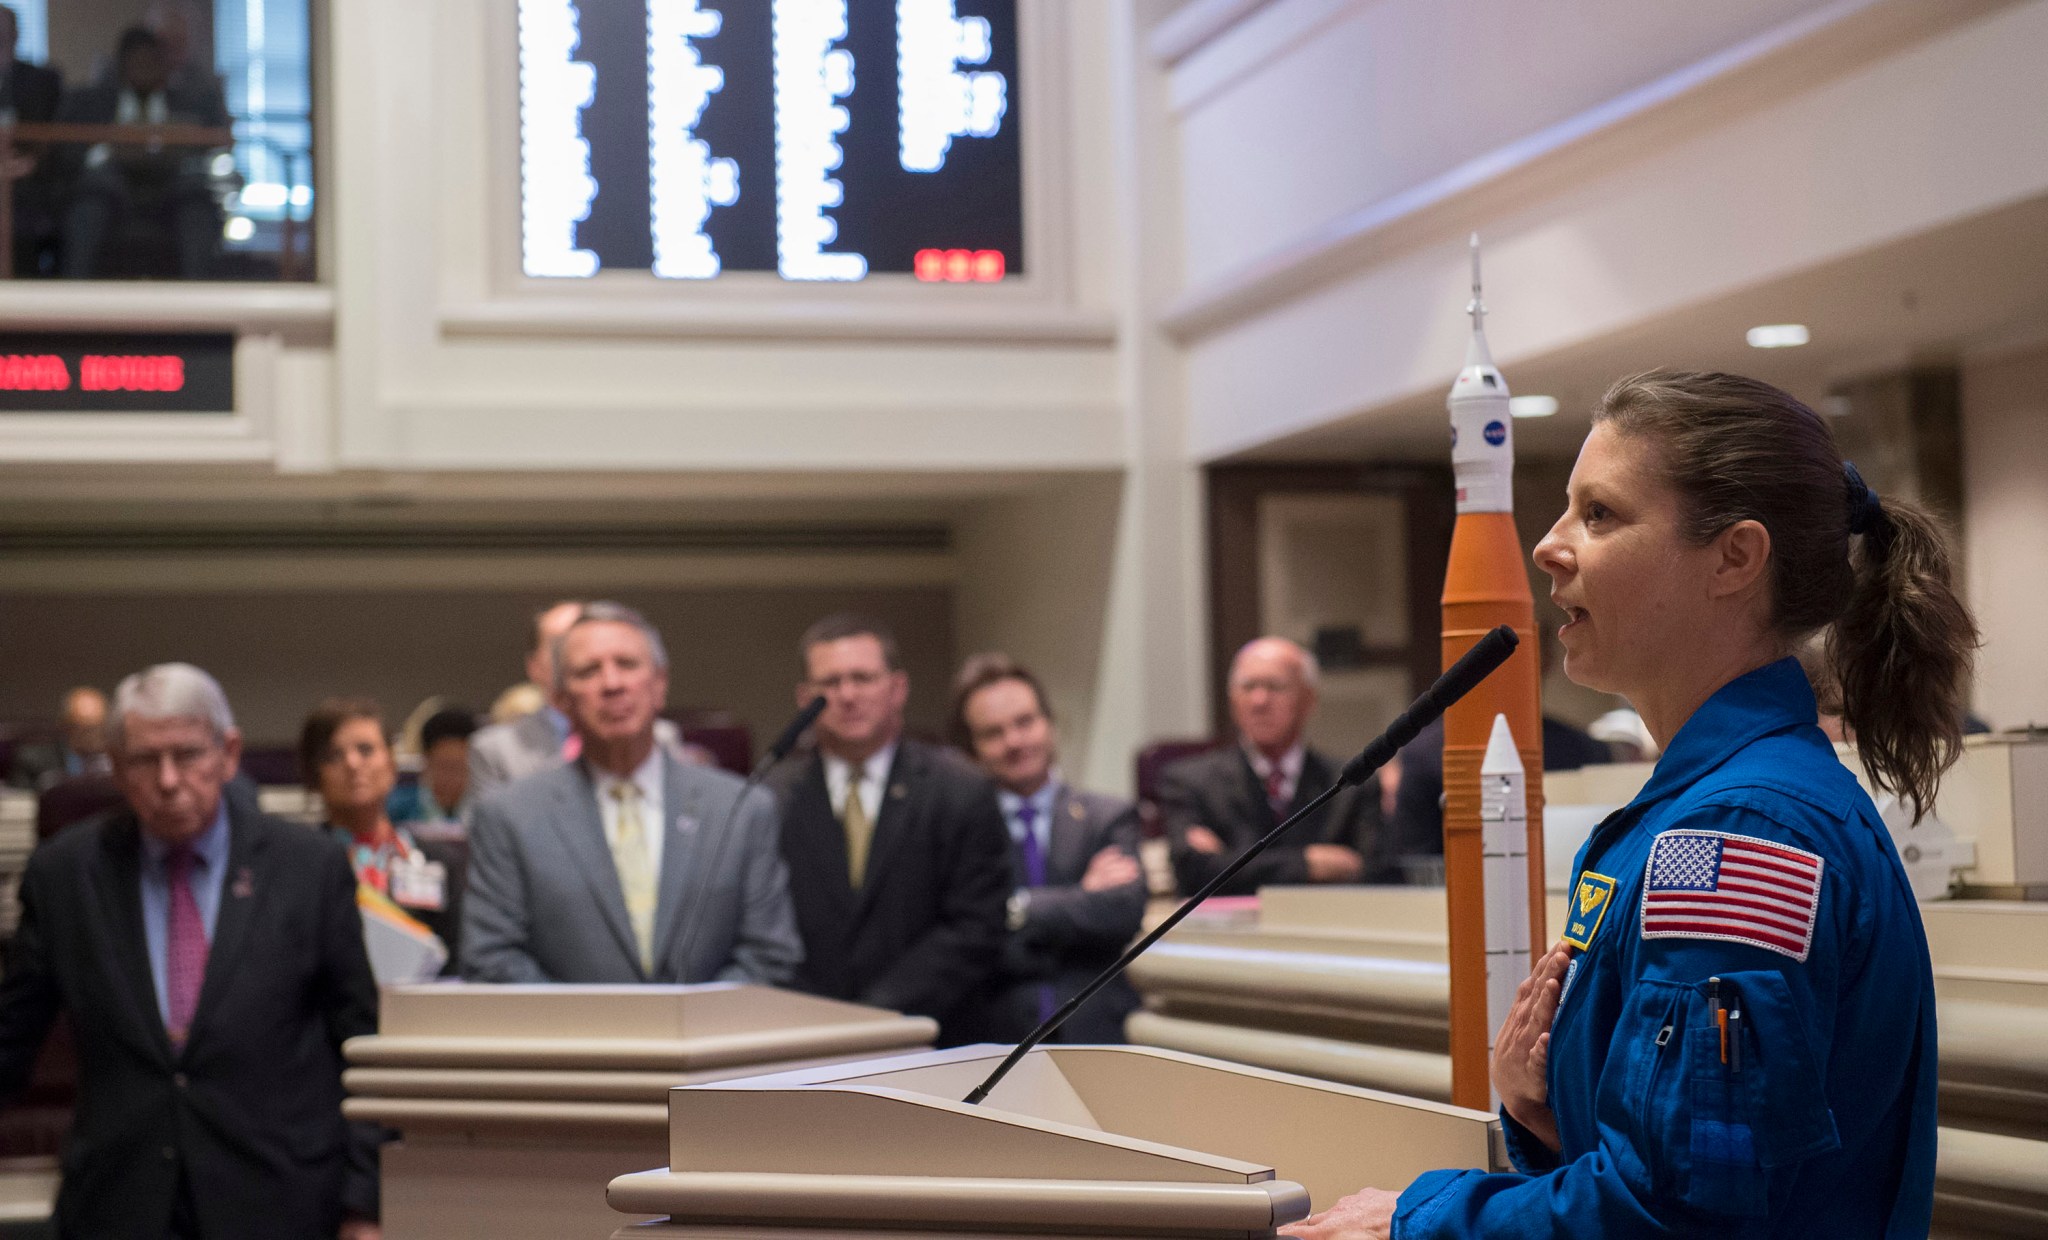 With a Space Launch System model beside her, NASA astronaut Tracy Dyson addresses members of the Alabama House of Representative